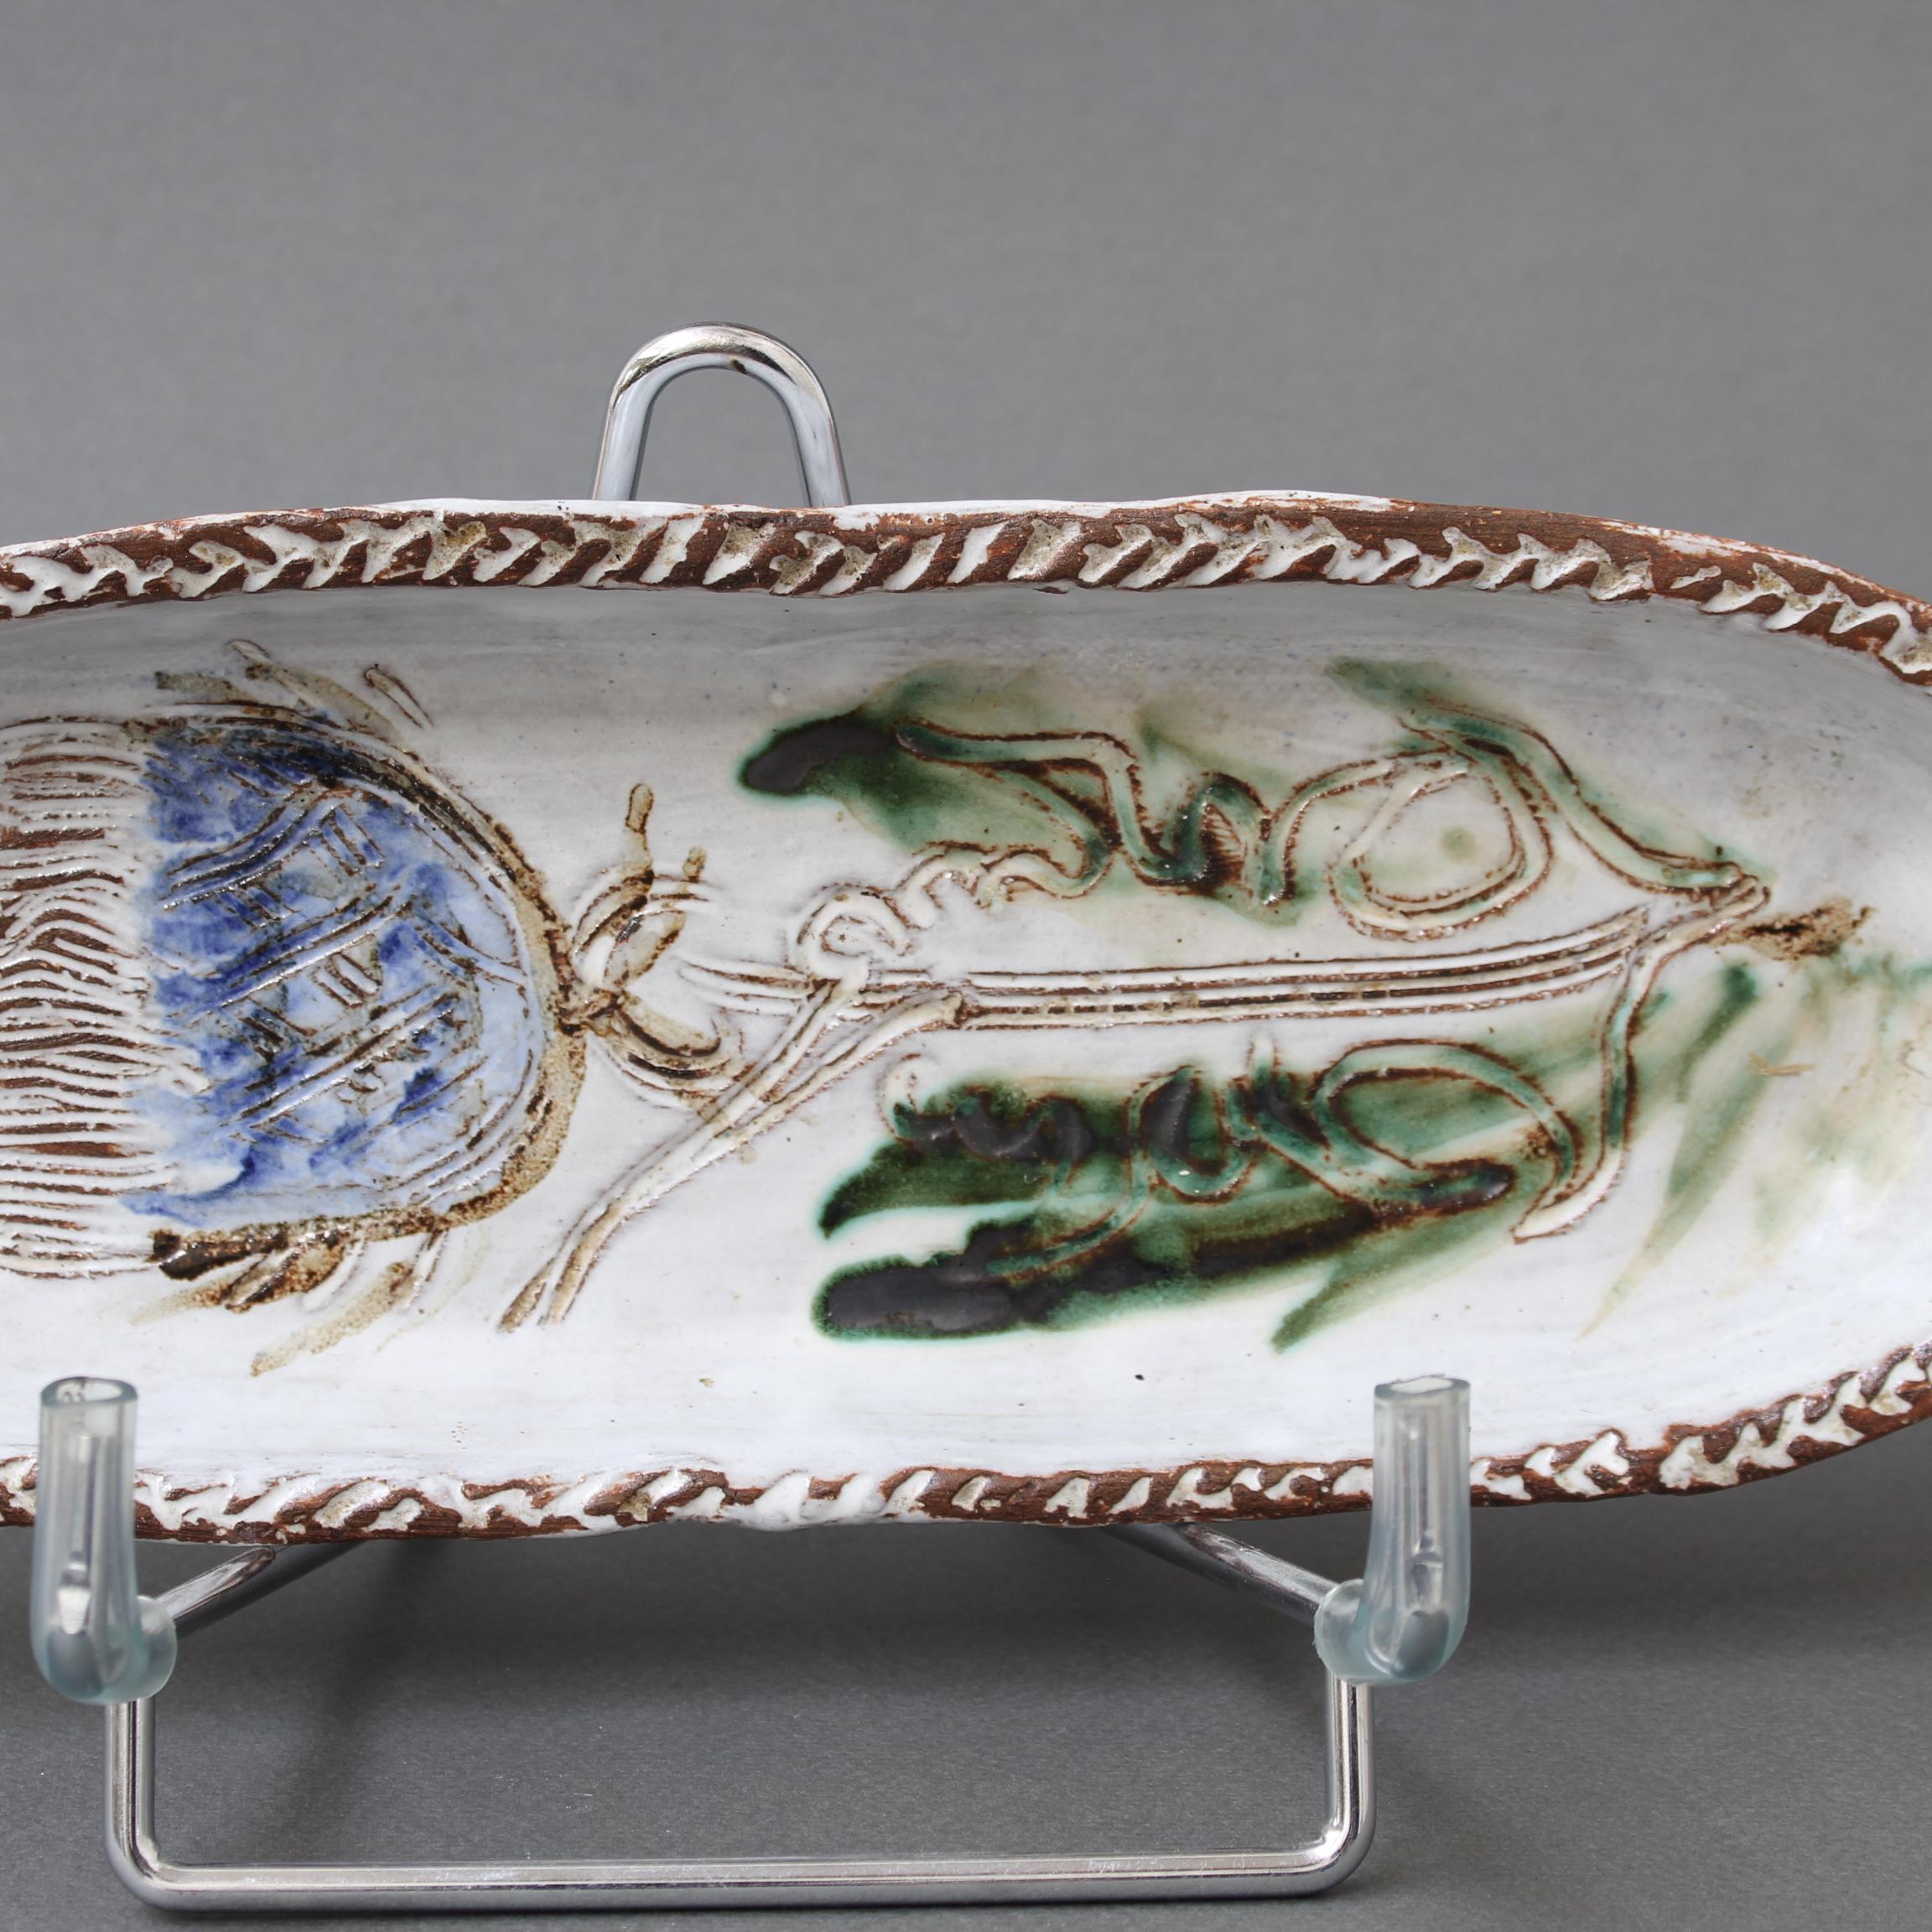 Late 20th Century French Ceramic Decorative Dish with Flower Motif by Albert Thiry (circa 1970s) For Sale